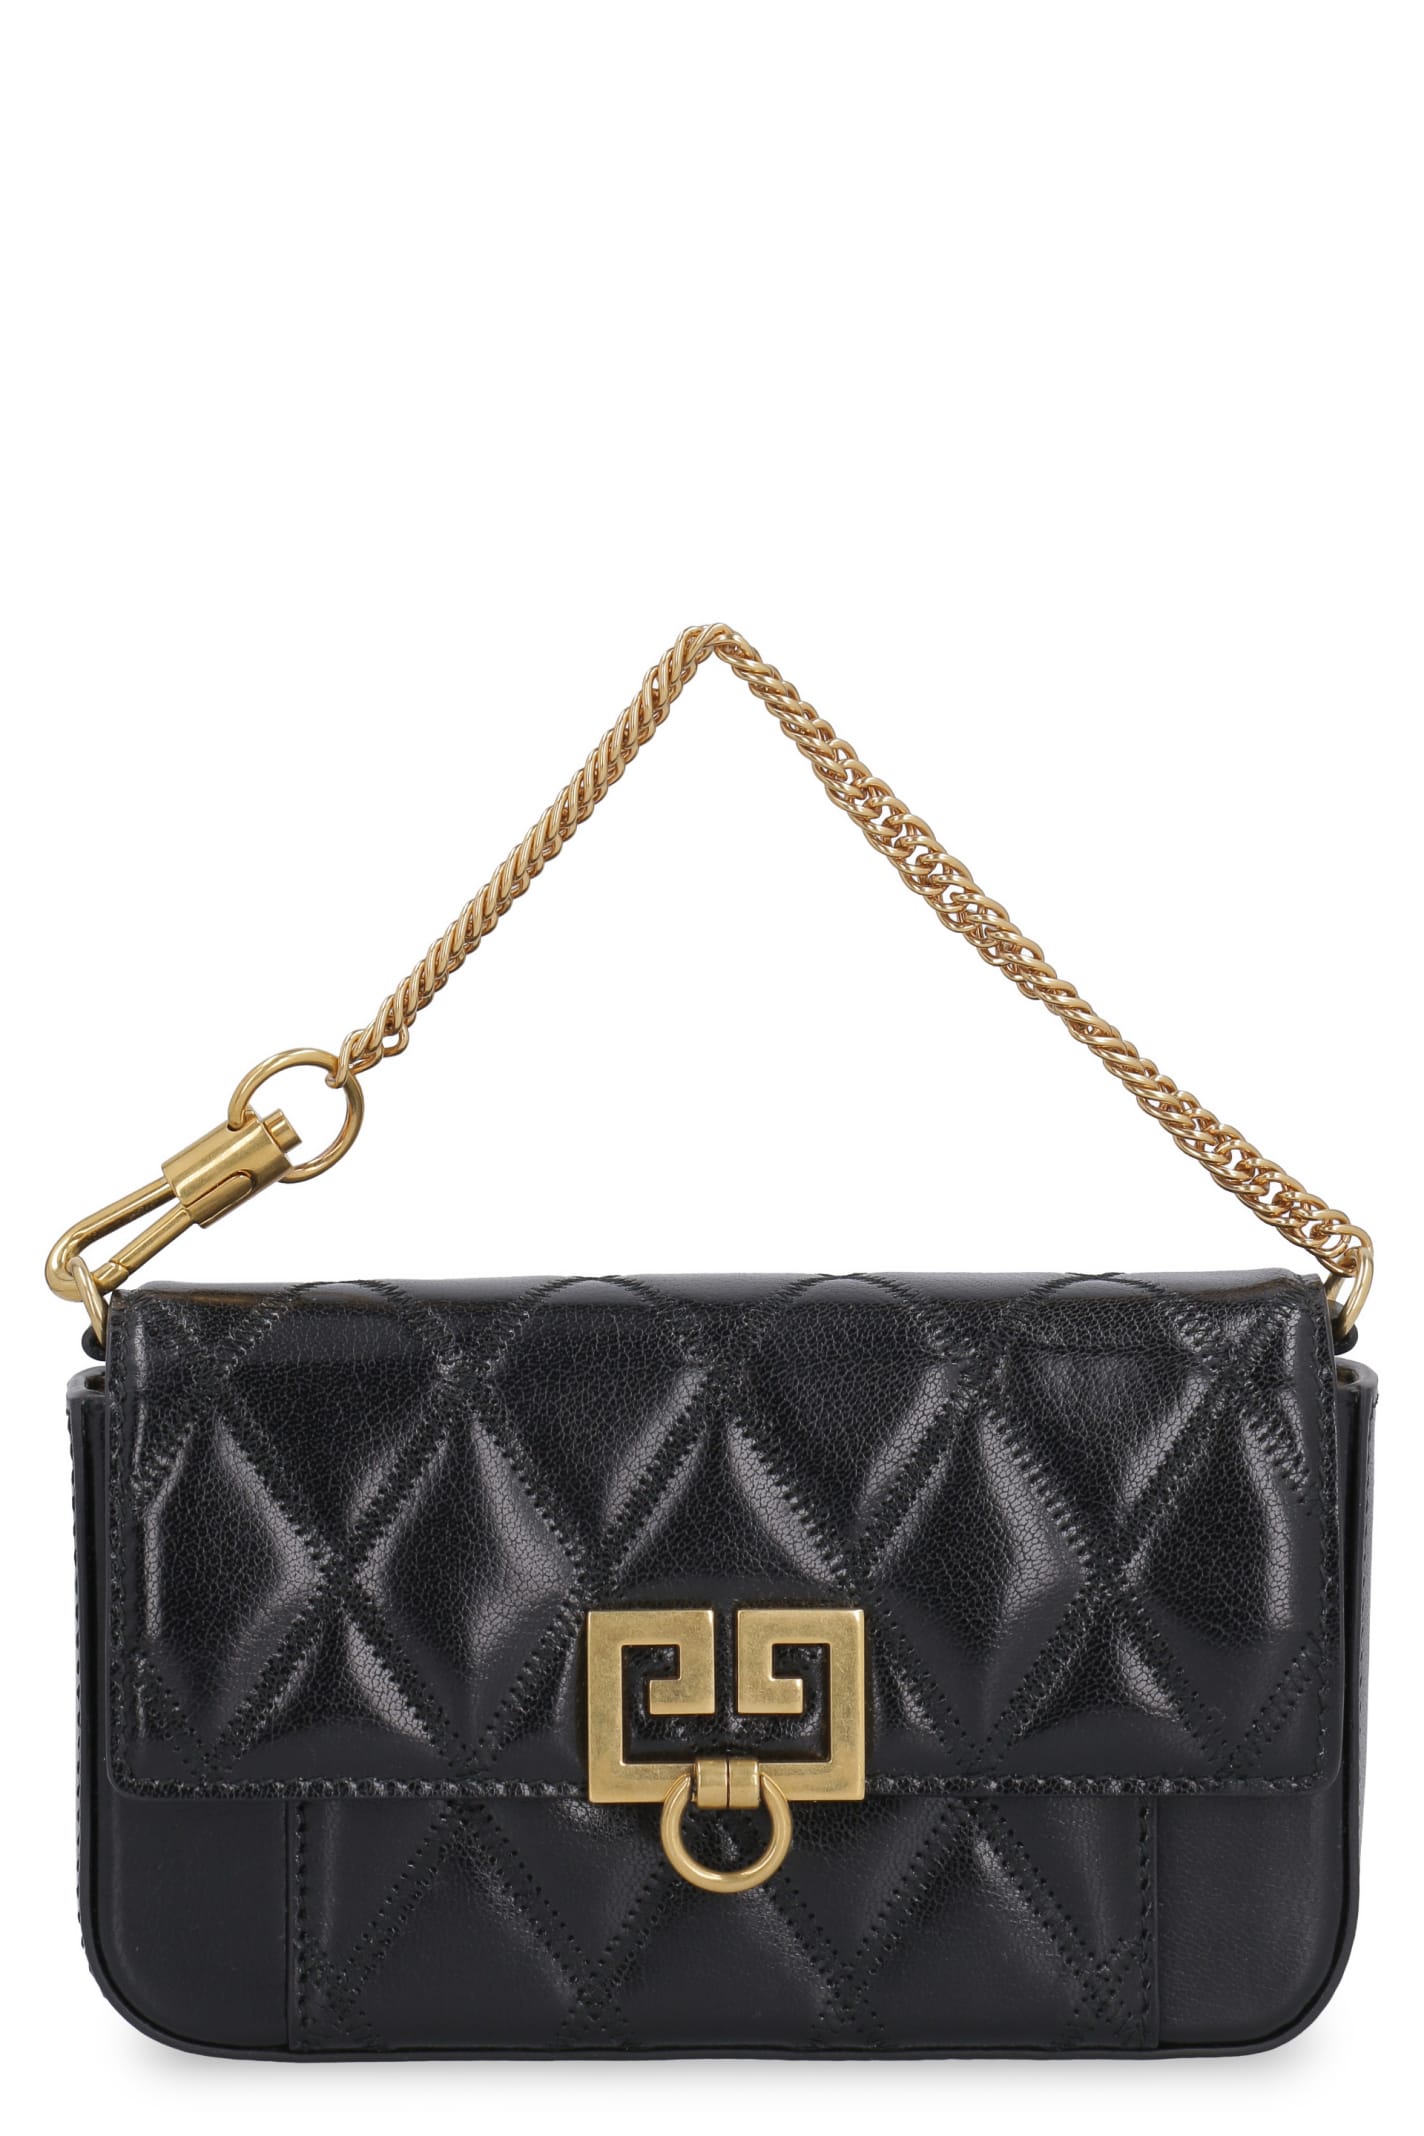 Givenchy Givenchy Pocket Quilted Leather Mini-bag - black - 10878358 | italist